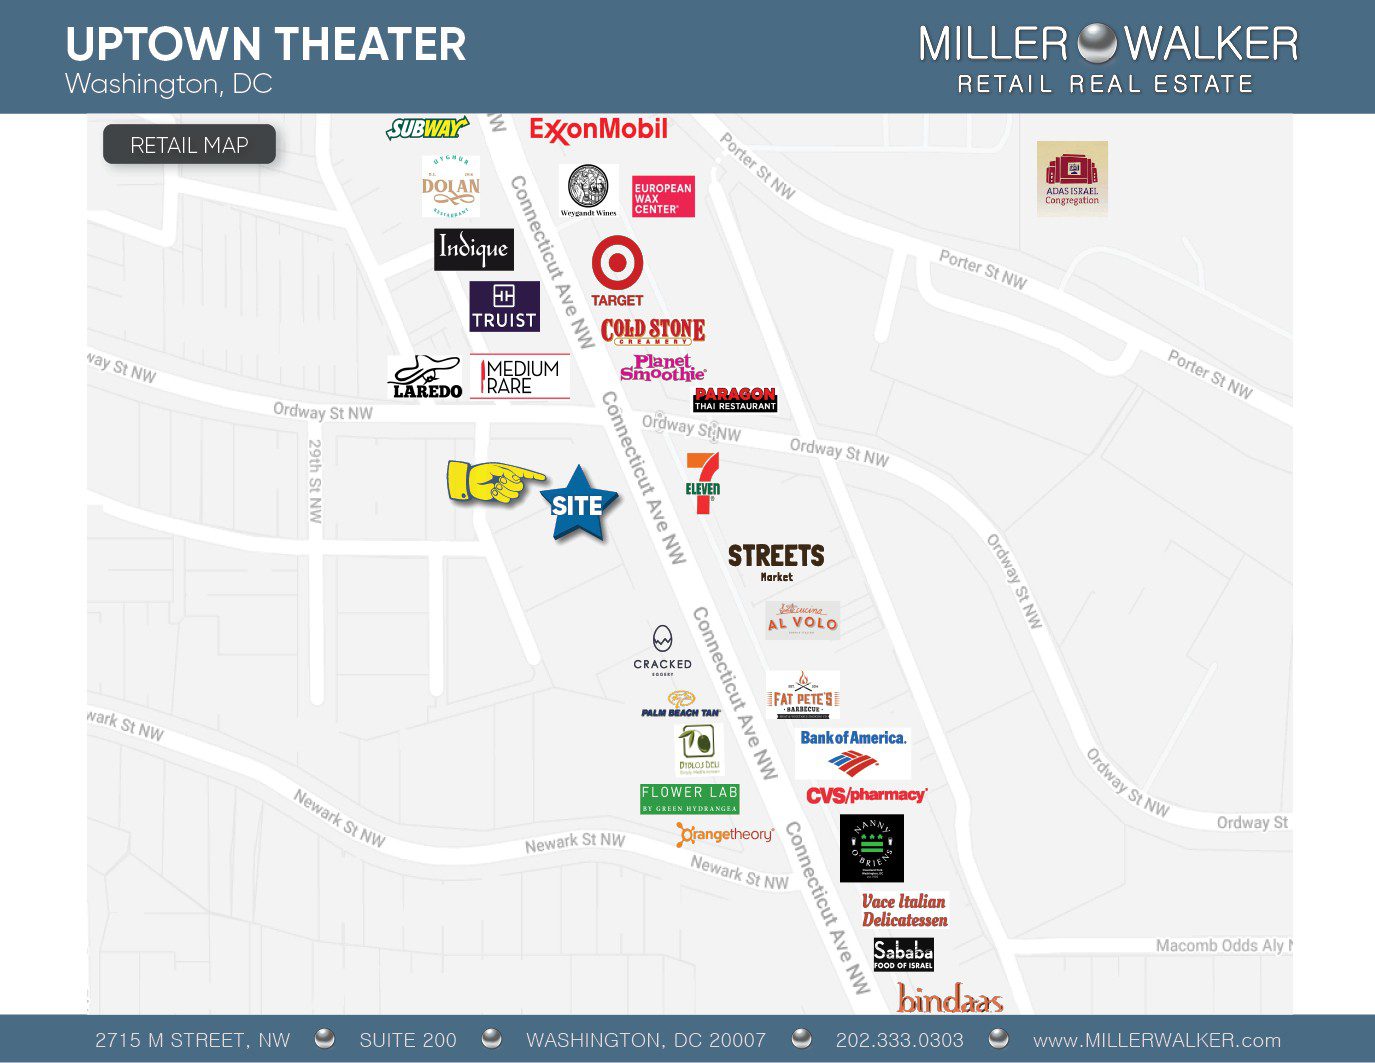 Retail Space for Lease DC - uptown theater Woodley park - nearby area retail map